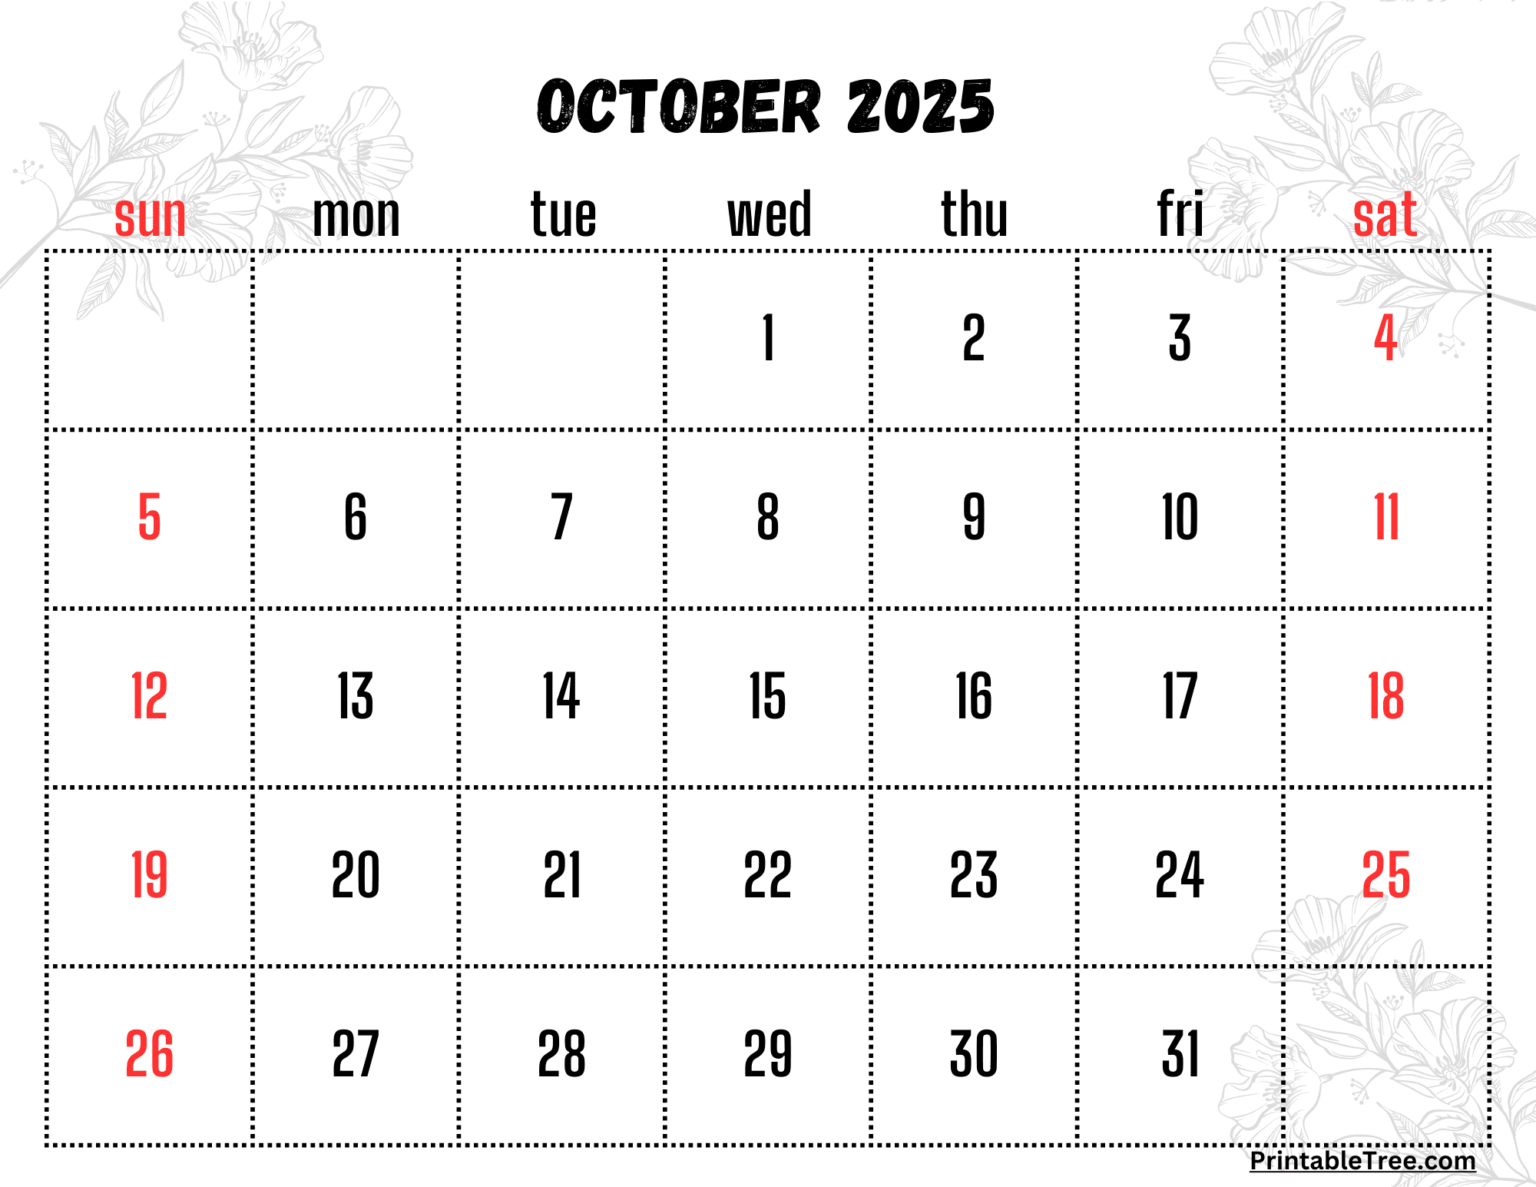 October 2025 Calendar Printable PDF Template with Holidays